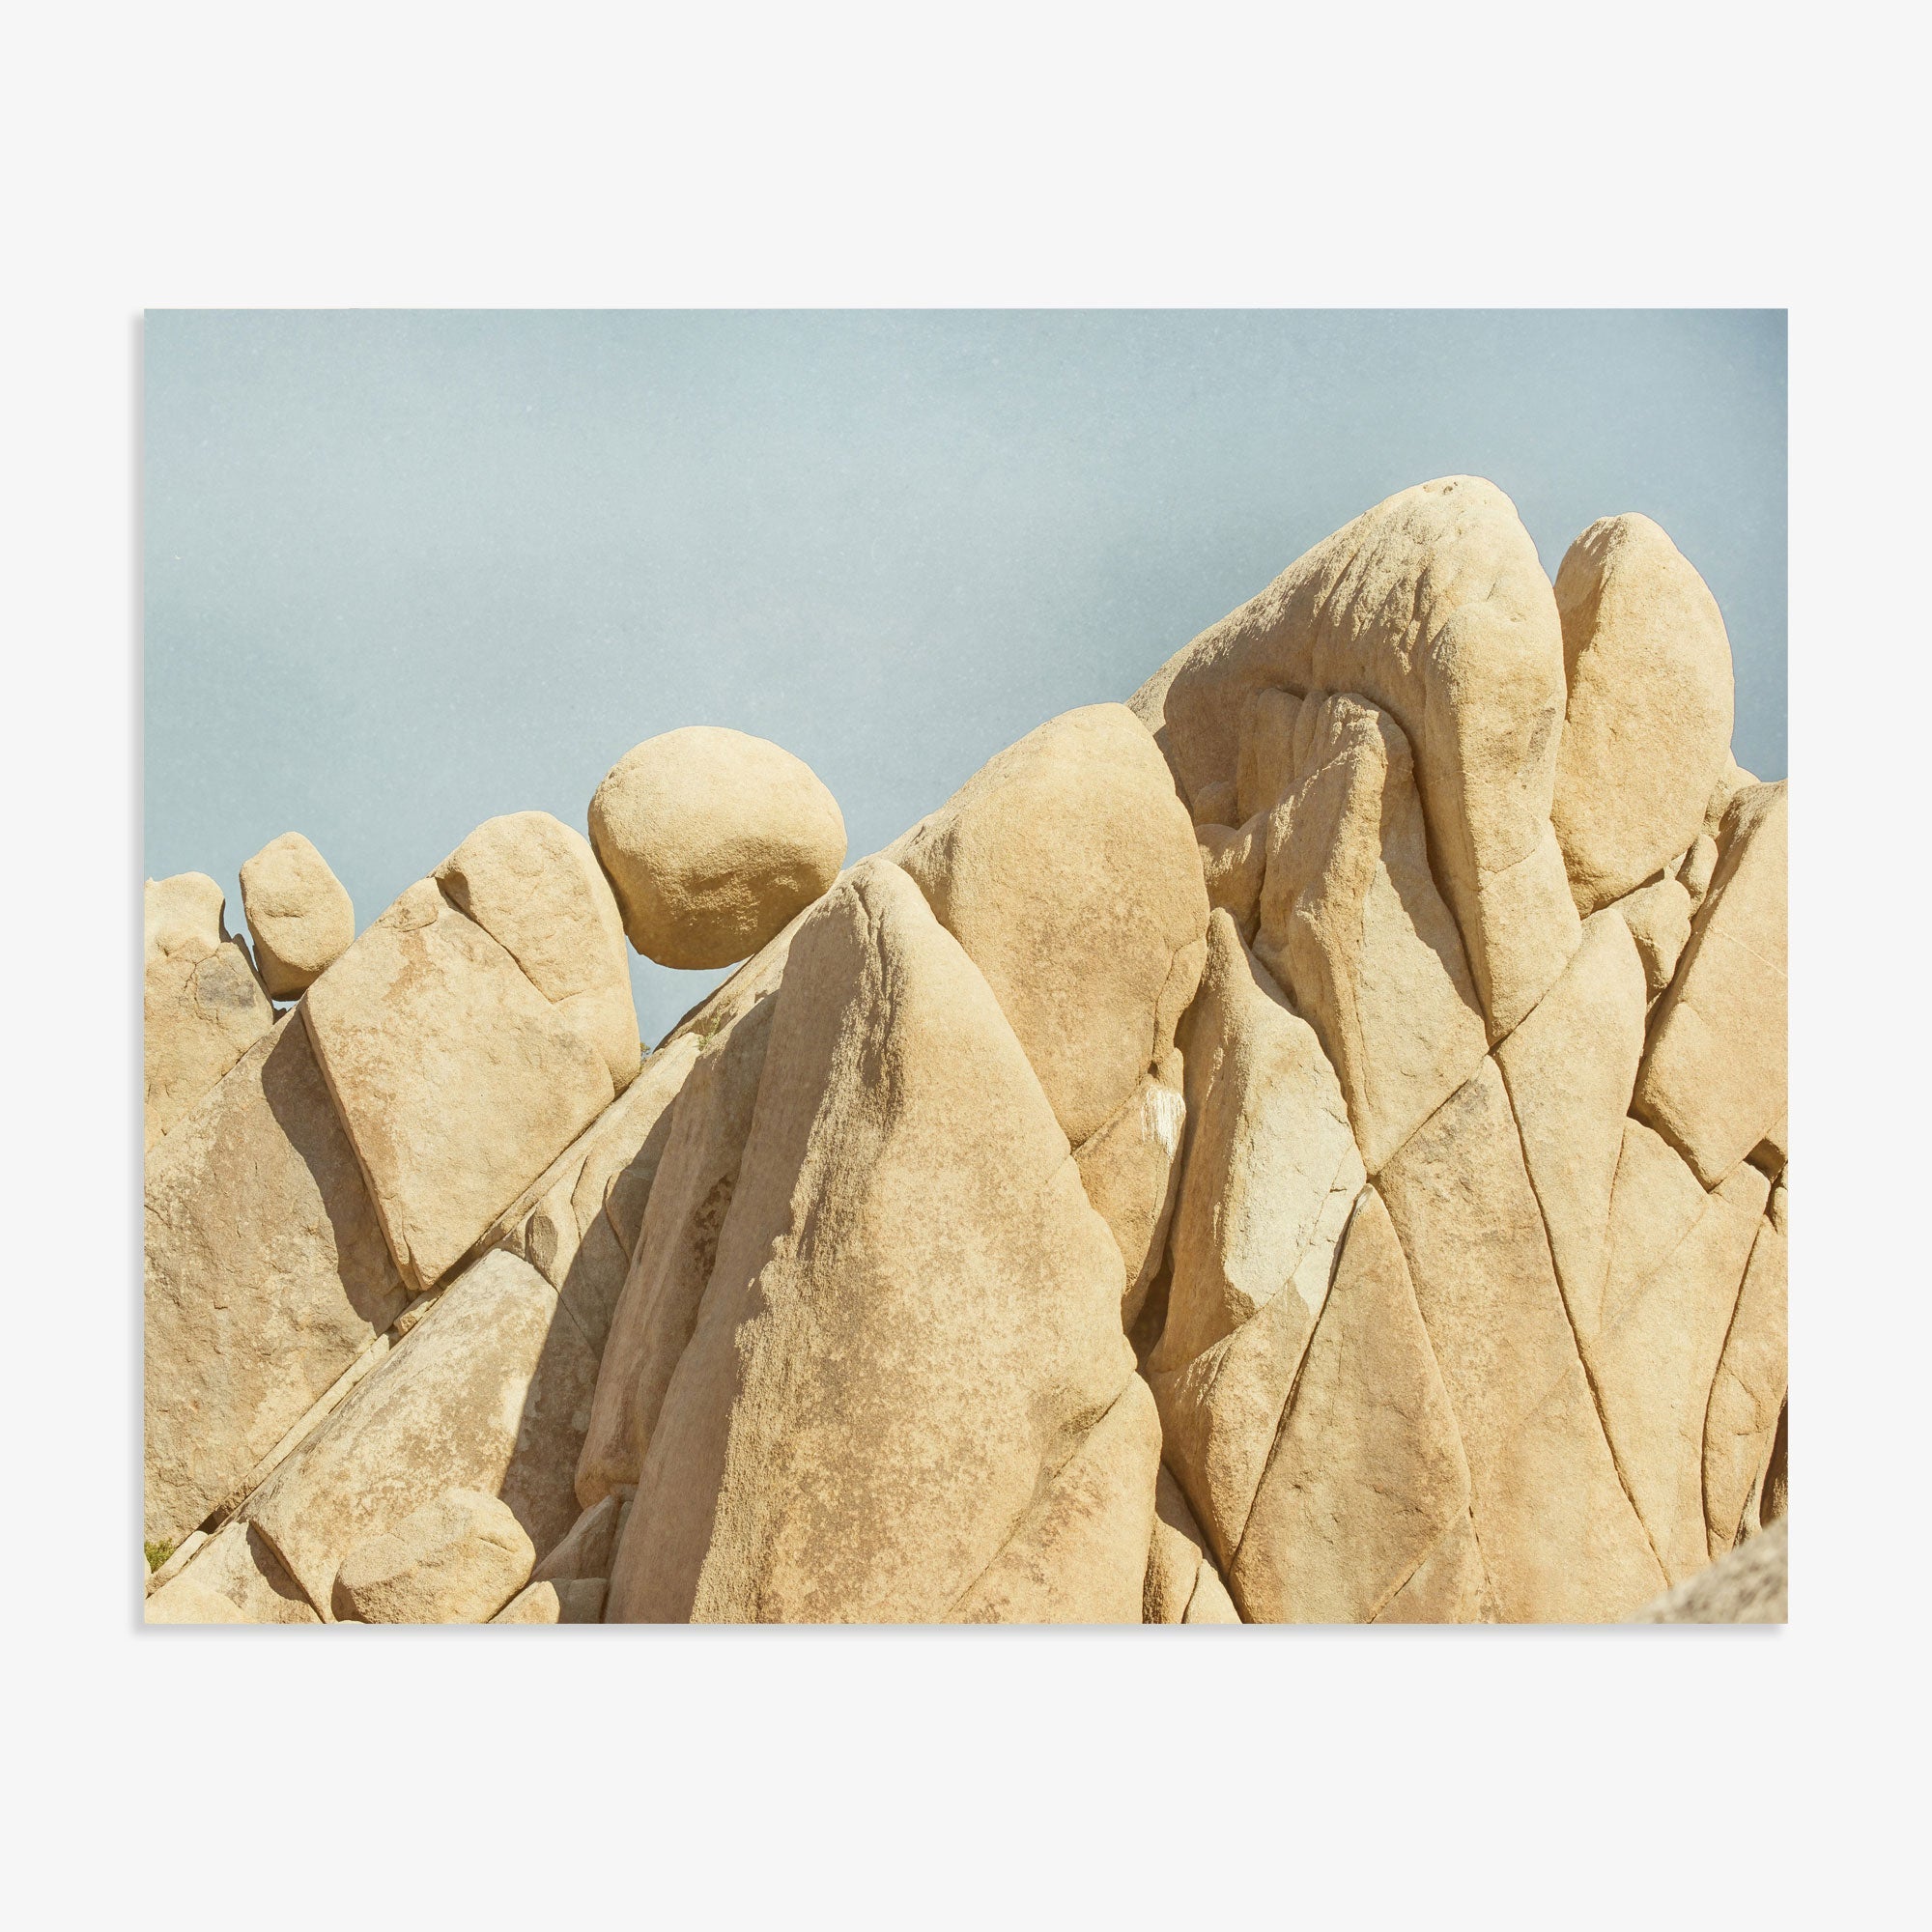 A series of large, smooth beige rocks in Joshua Tree National Park under a clear blue sky, closely packed and showing varying shapes and textures, resembling a rugged mountain landscape. The Offley Green &#39;Rock Formations&#39; Joshua Tree Print captures the stunning beauty of this iconic park.